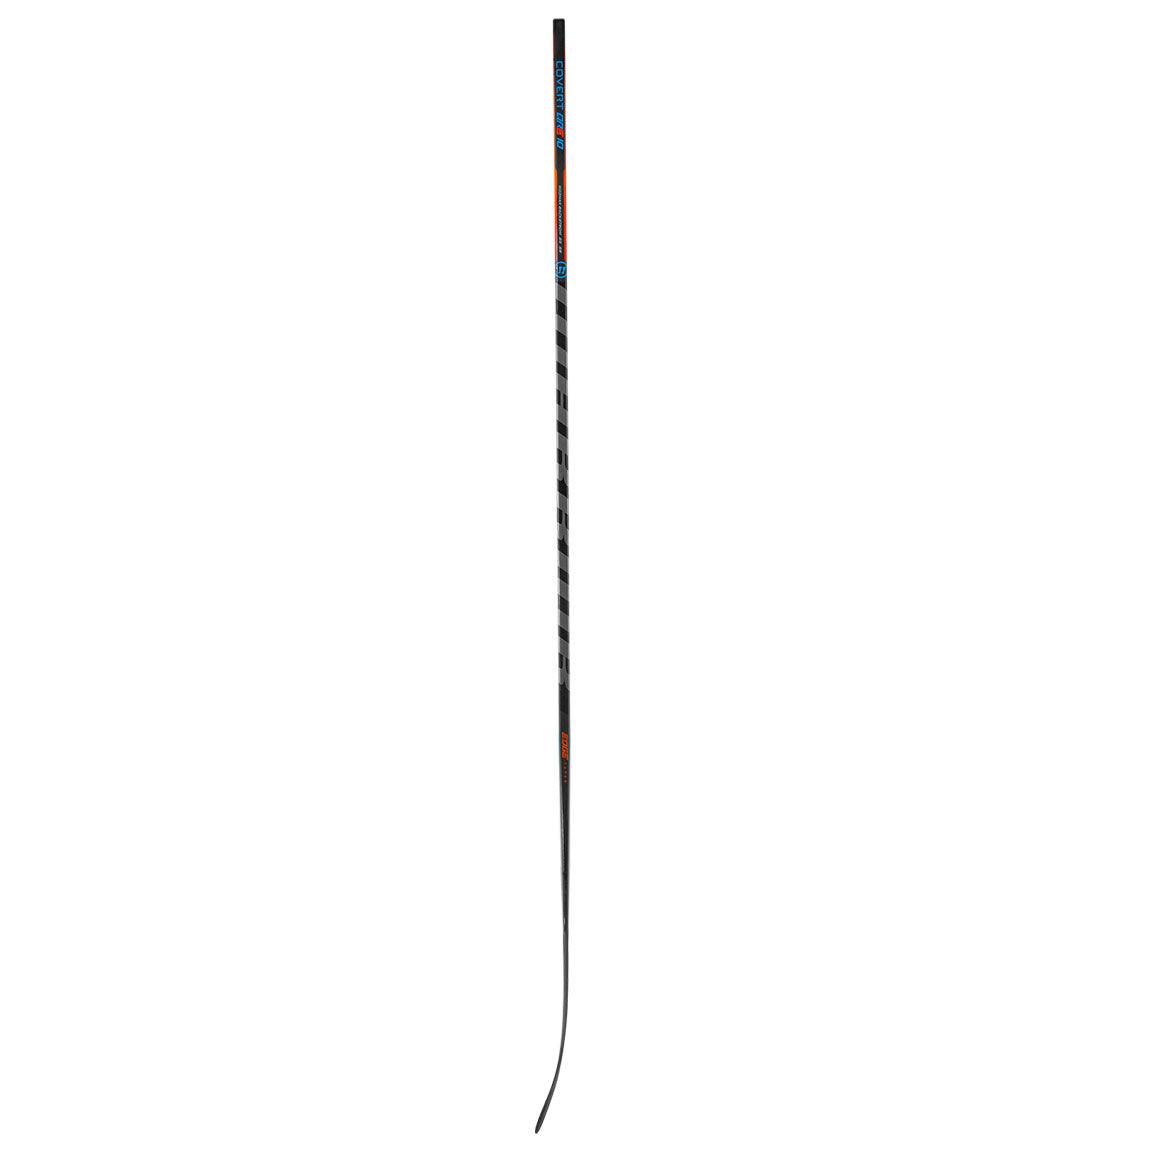 Covert QRE 10 Hockey Stick - Intermediate - Sports Excellence